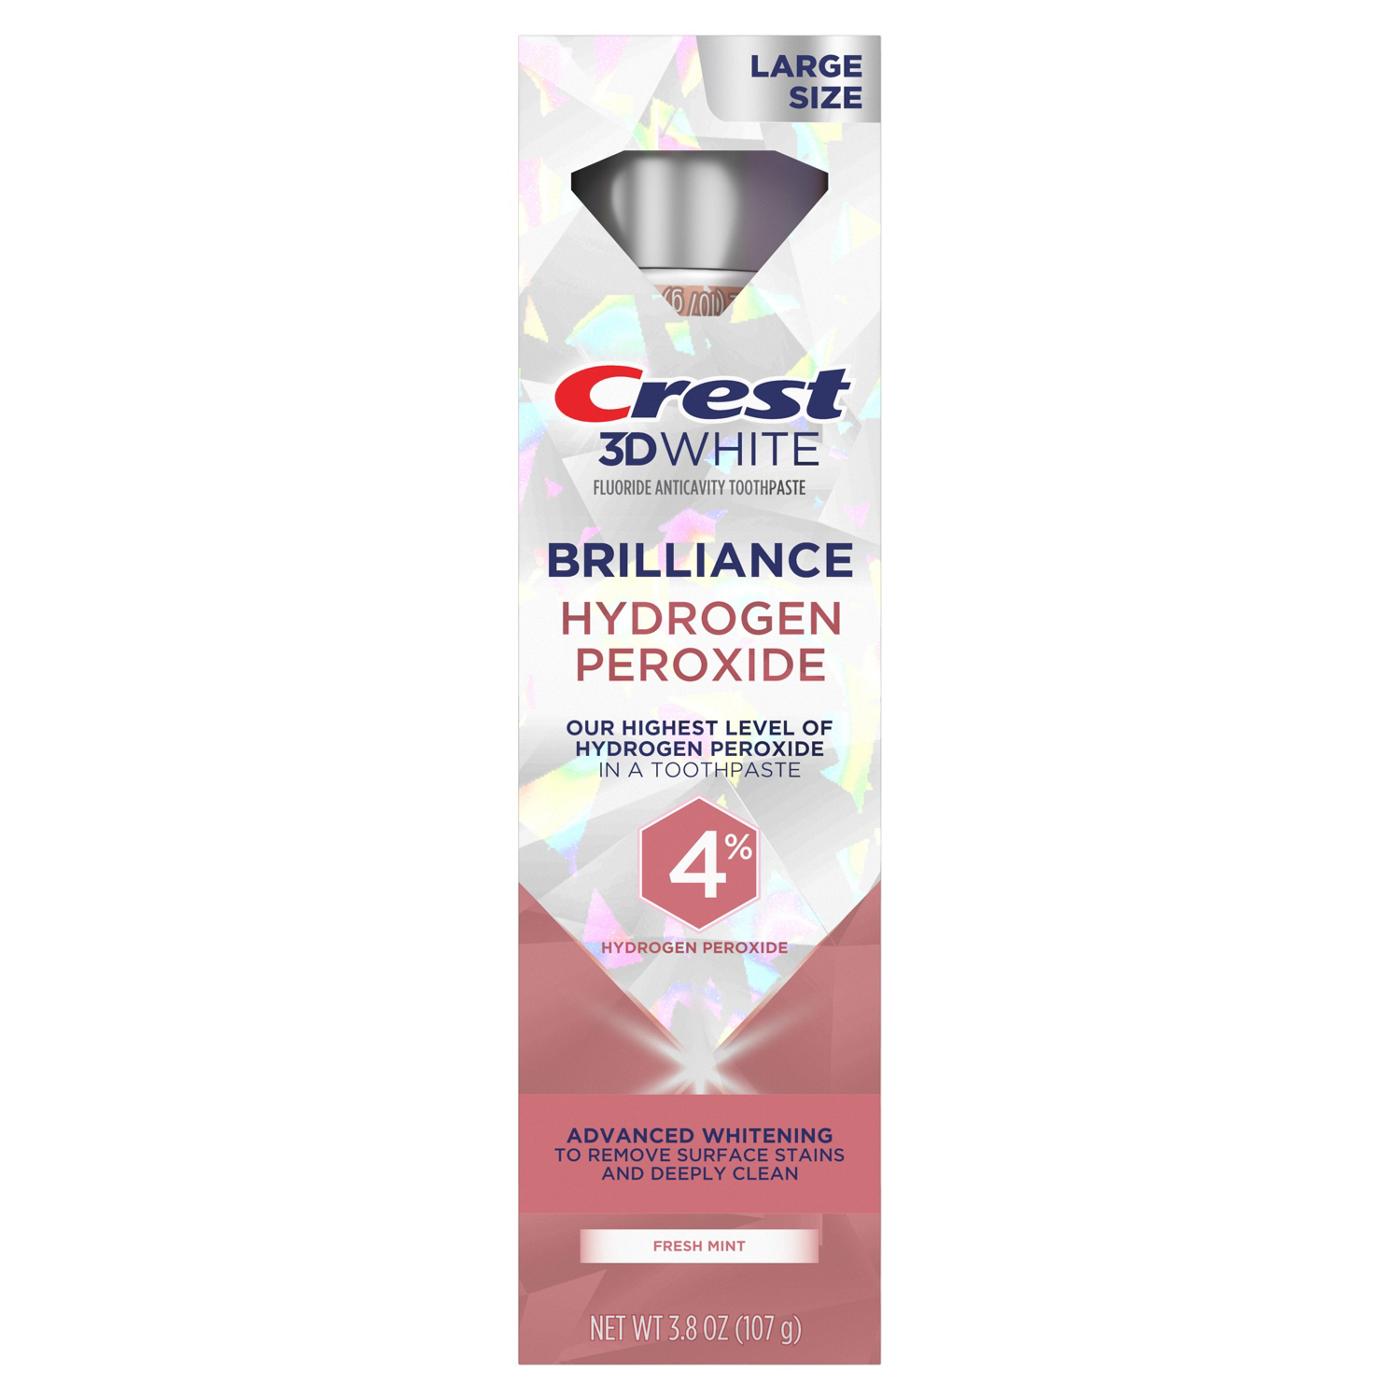 Crest 3D White Brilliance Hydrogen Peroxide Toothpaste - Fresh Mint; image 1 of 7